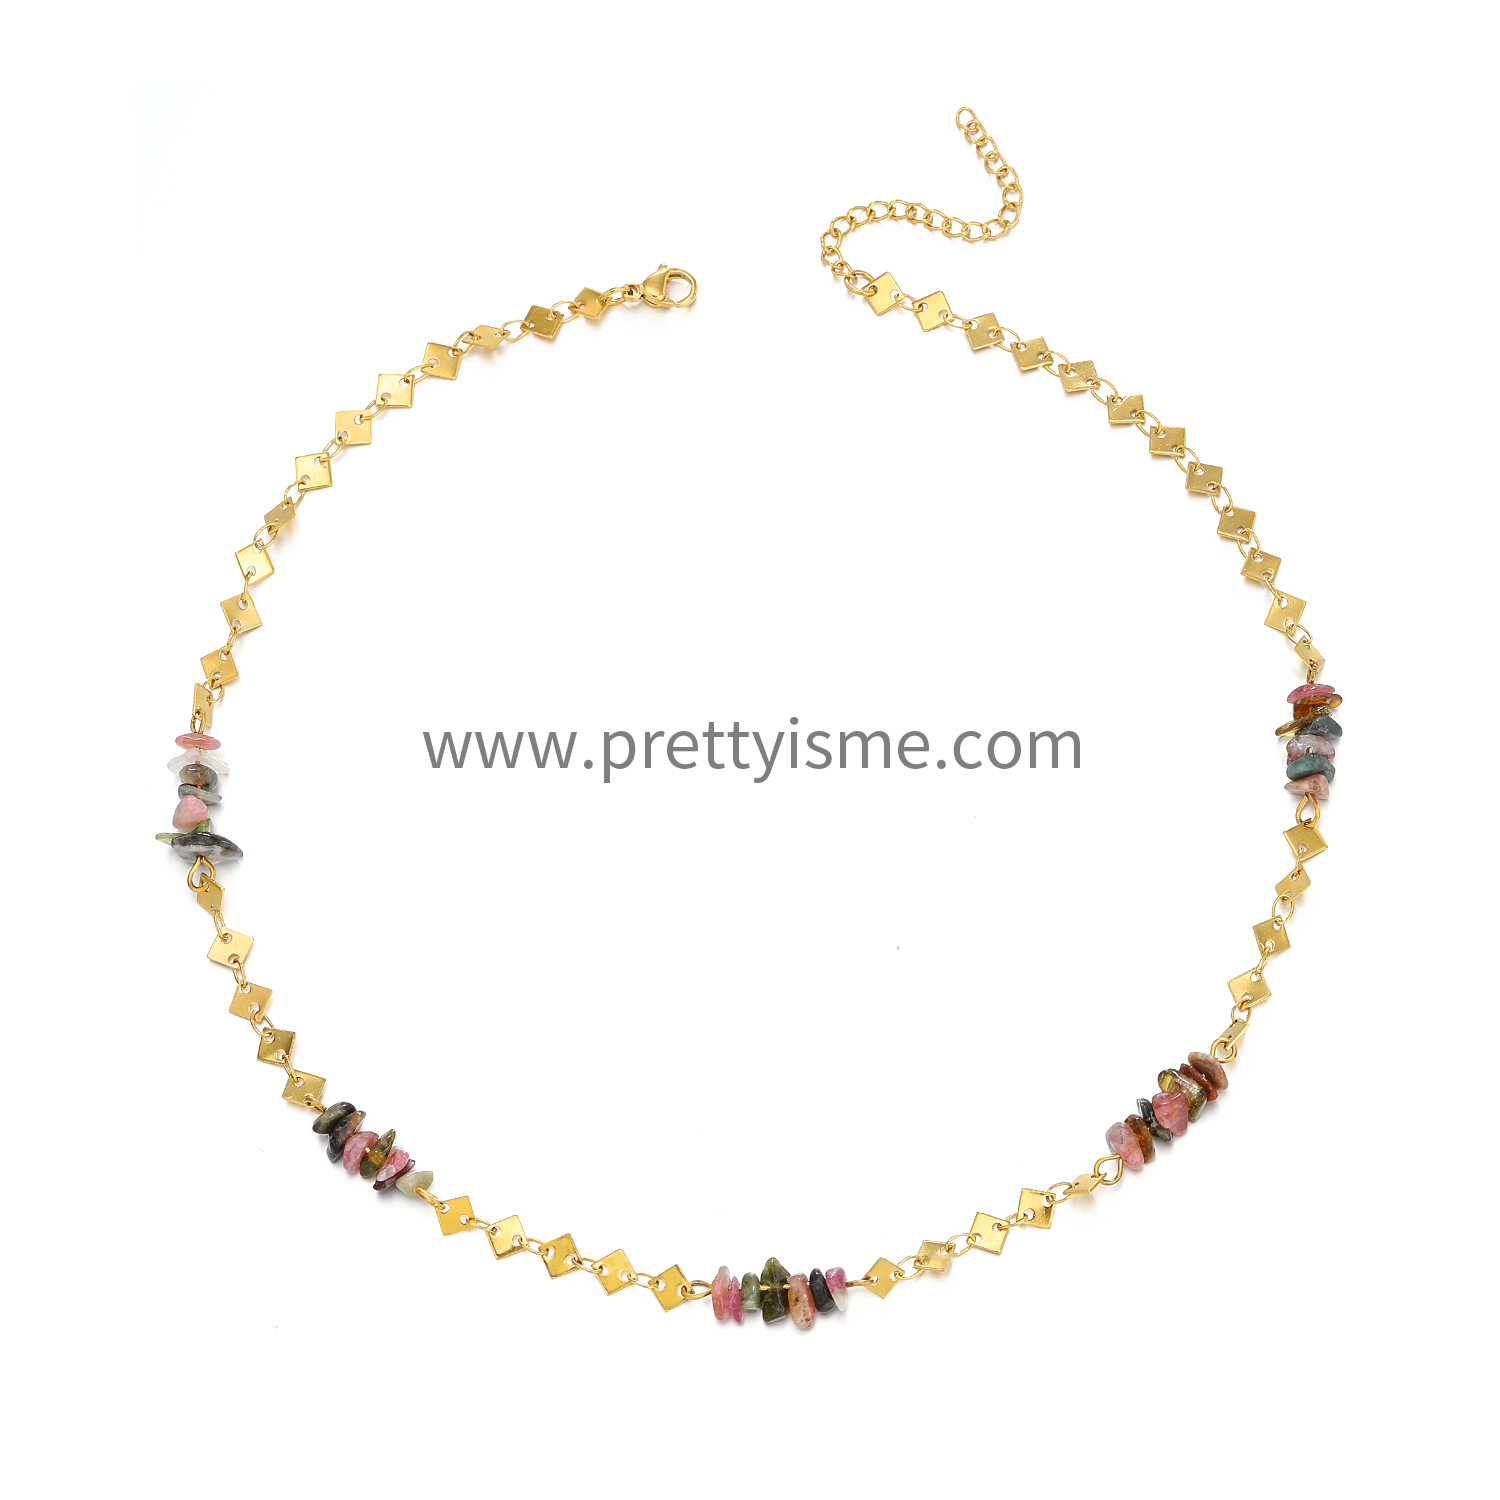 Pretty Is Me Collection 18K Gold Plated 316L Stainless Steel Geometric Link Chain Colorful Stone Beads Choker Necklace Women (6).webp